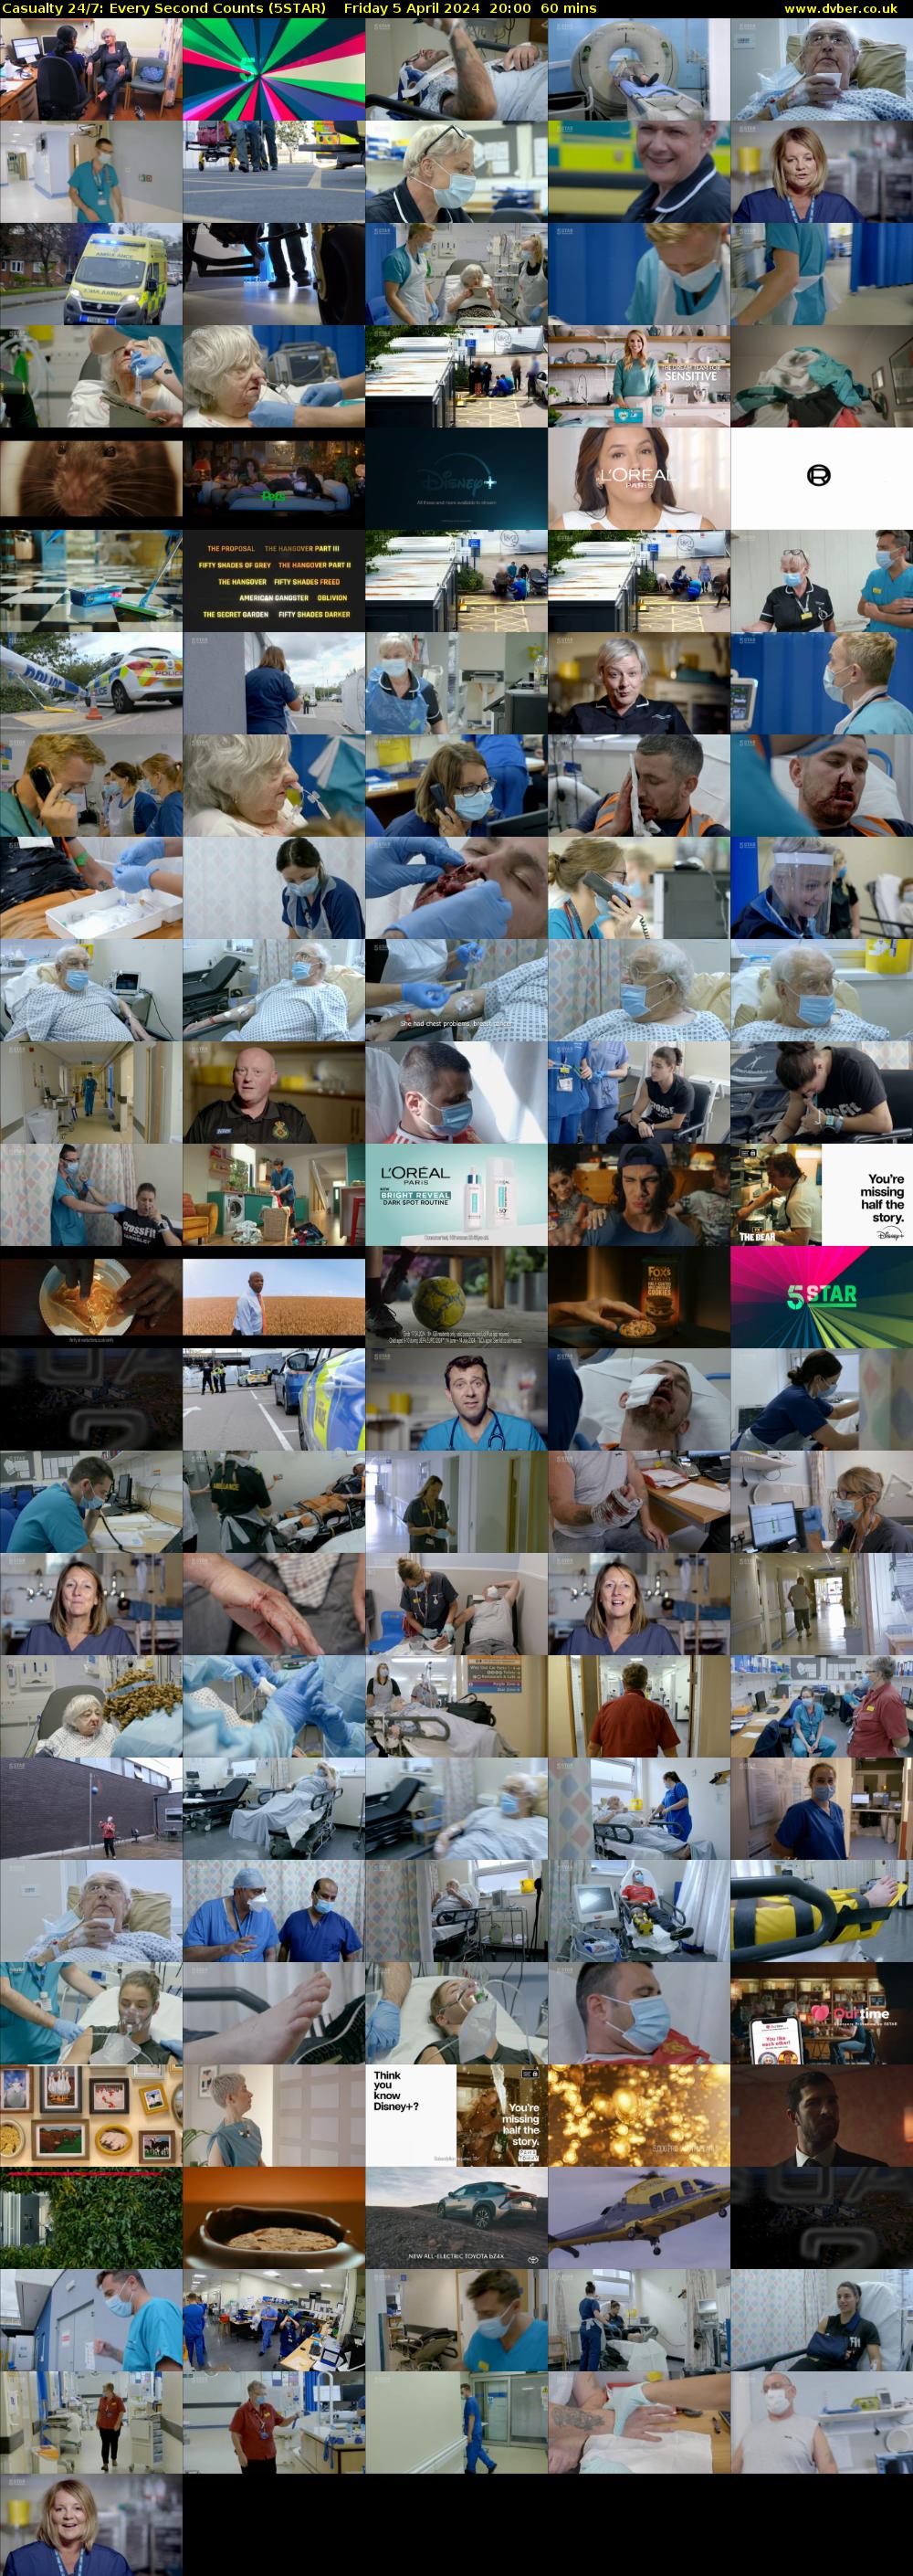 Casualty 24/7: Every Second Counts (5STAR) Friday 5 April 2024 20:00 - 21:00